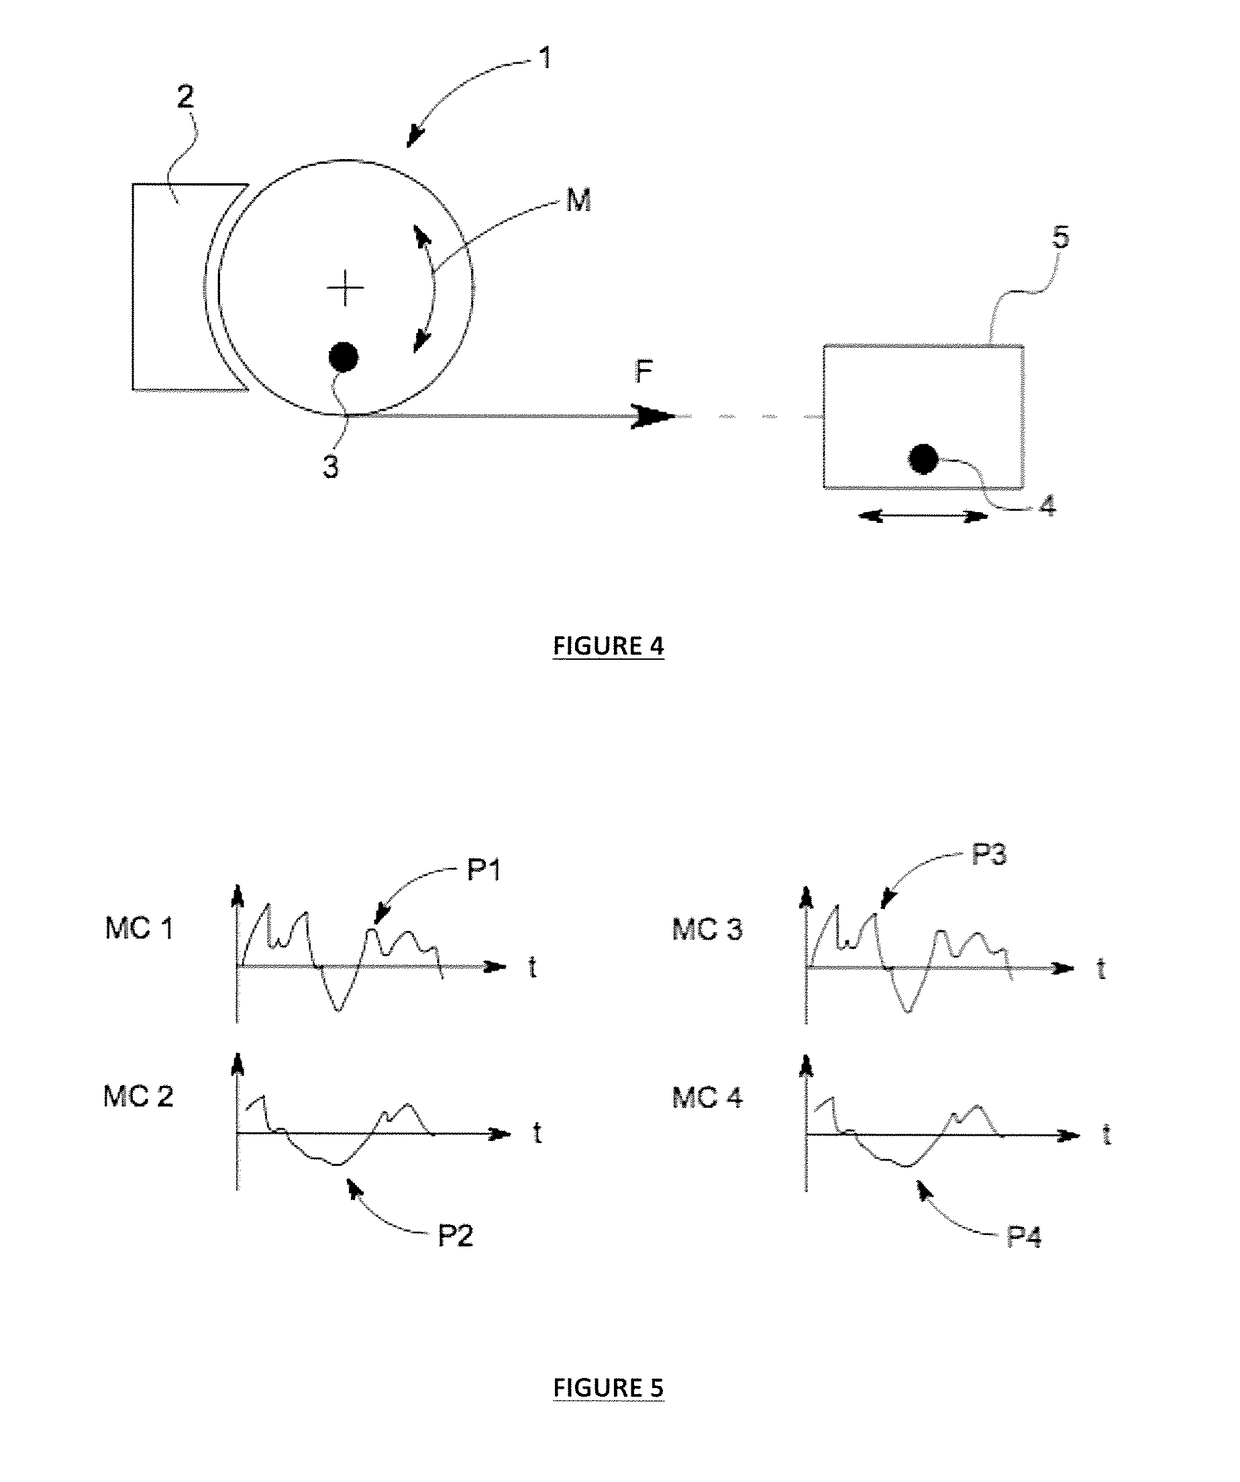 A variable behavior control mechanism for a motive system